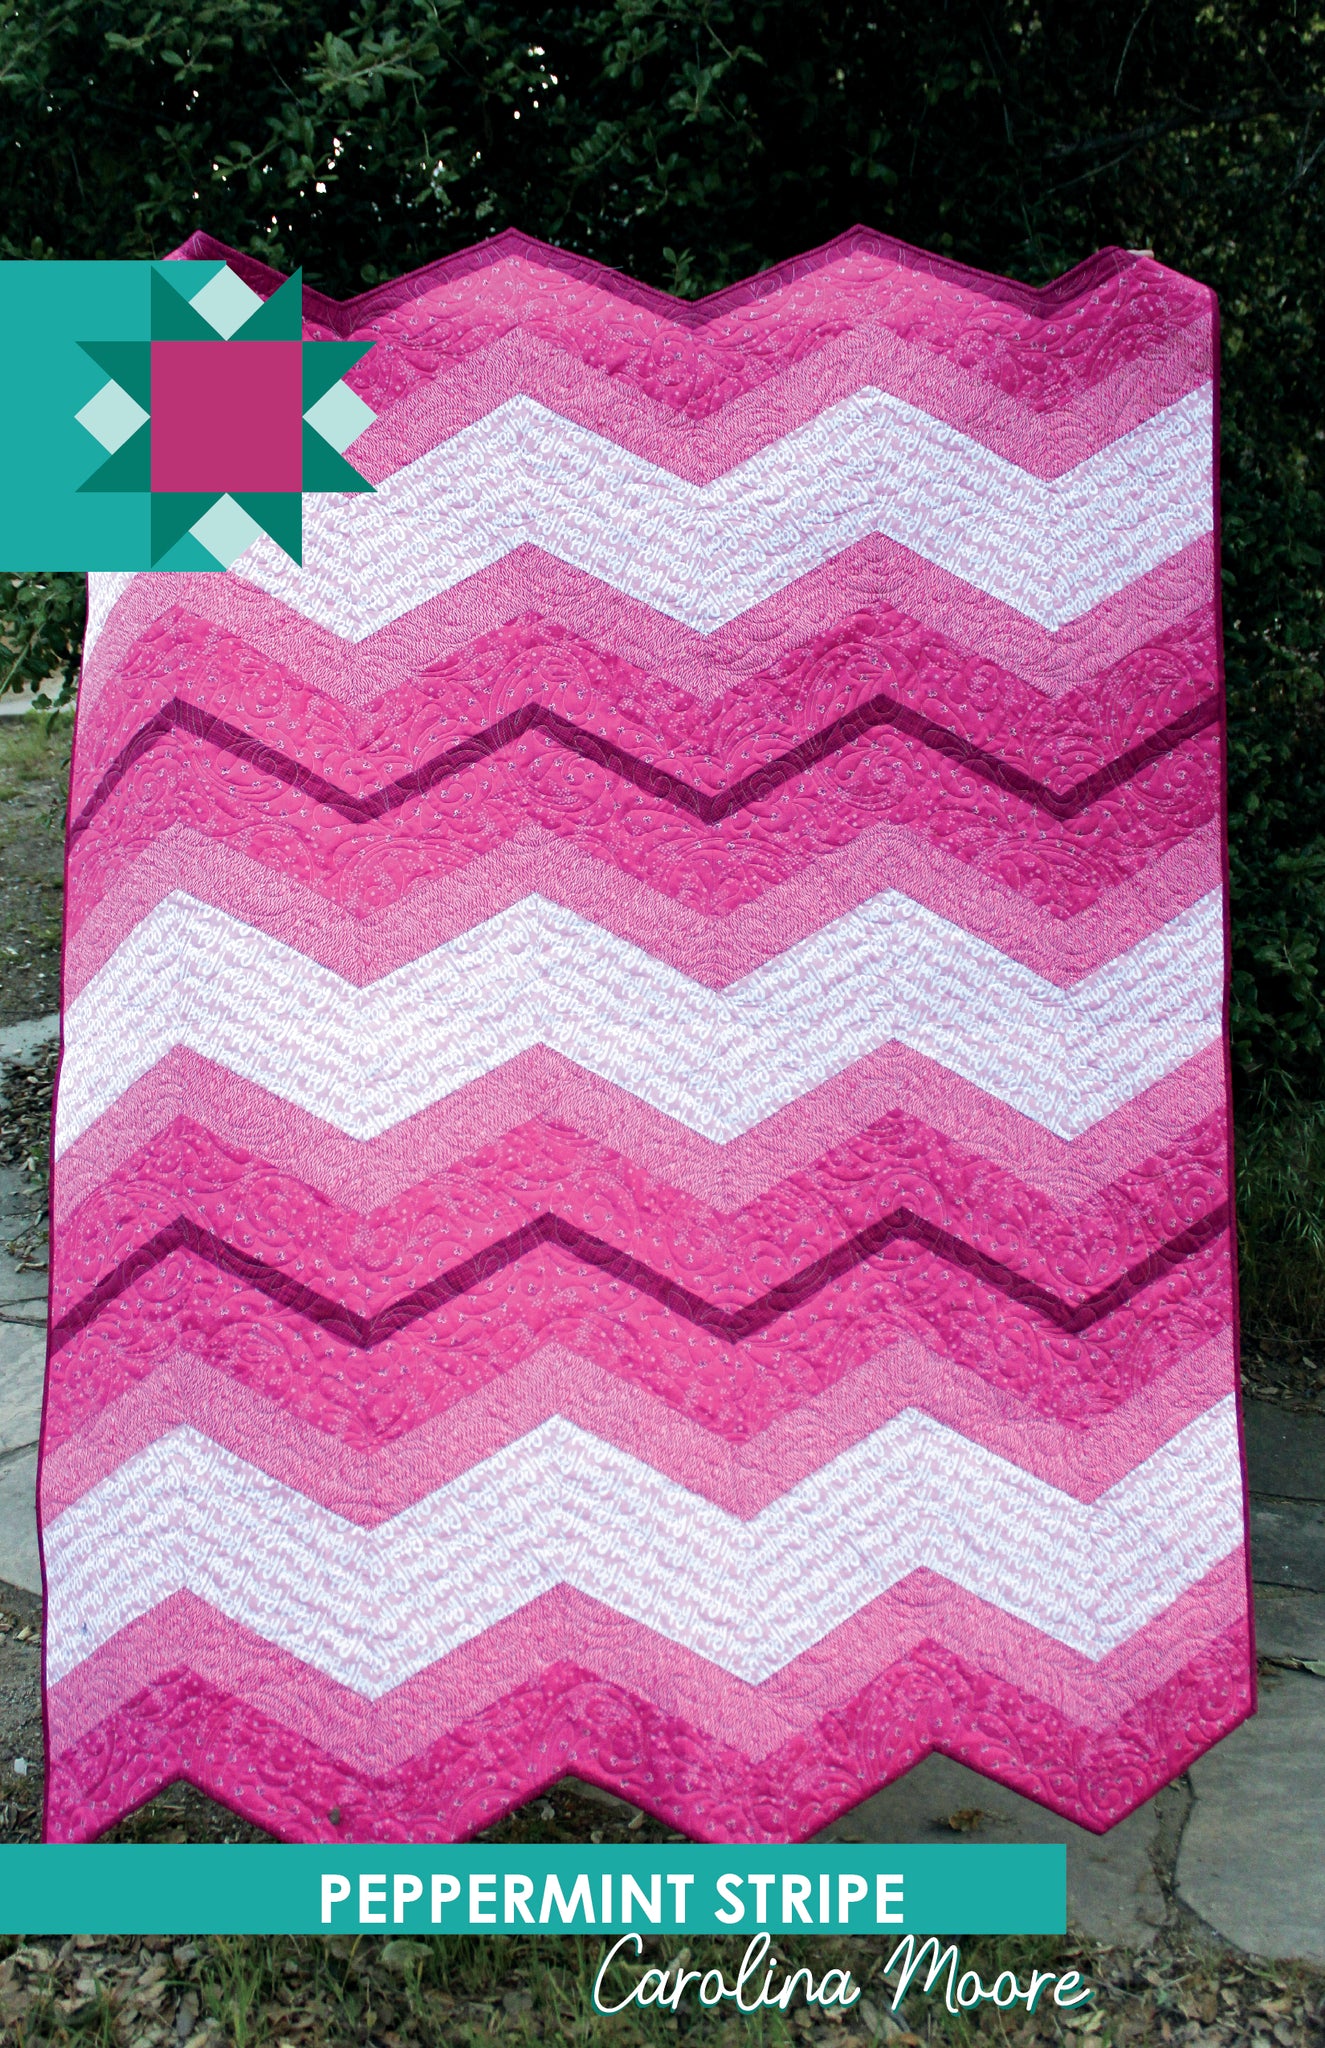 Peppermint Stripe Quilt Pattern - Printed